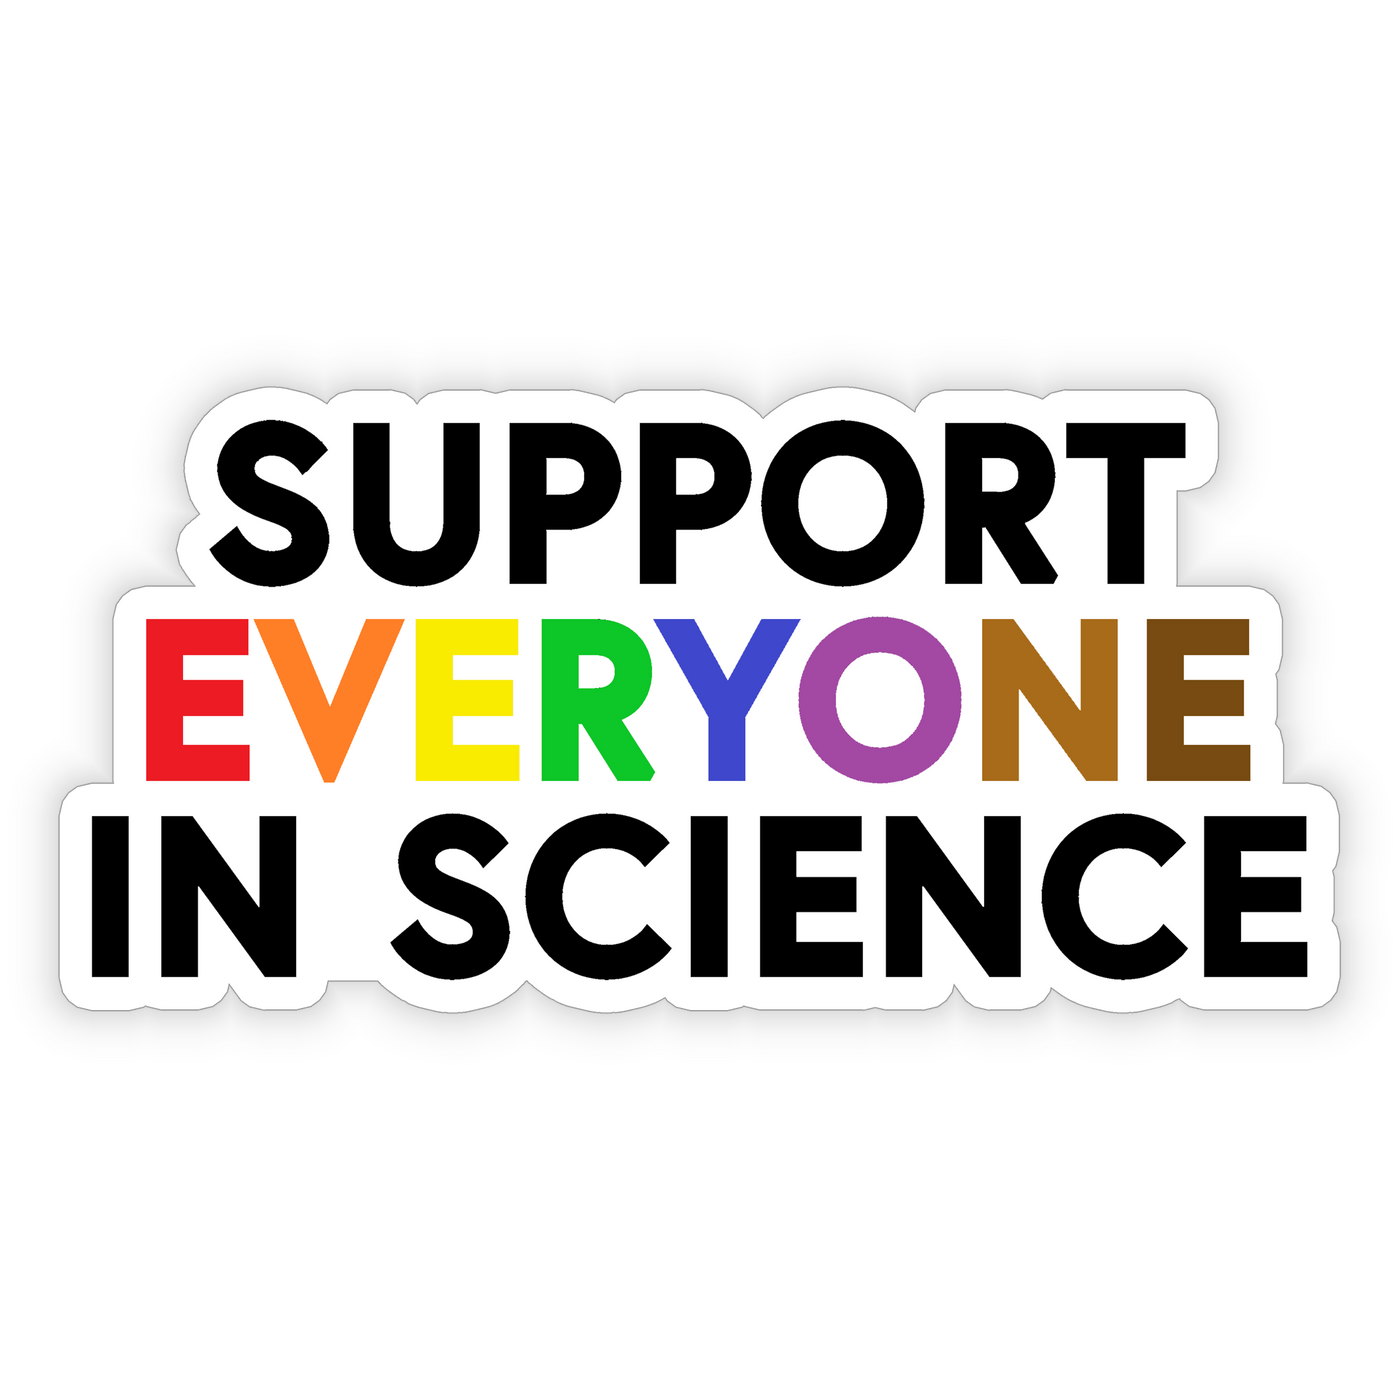 Support Everyone in Science - Vinyl Sticker